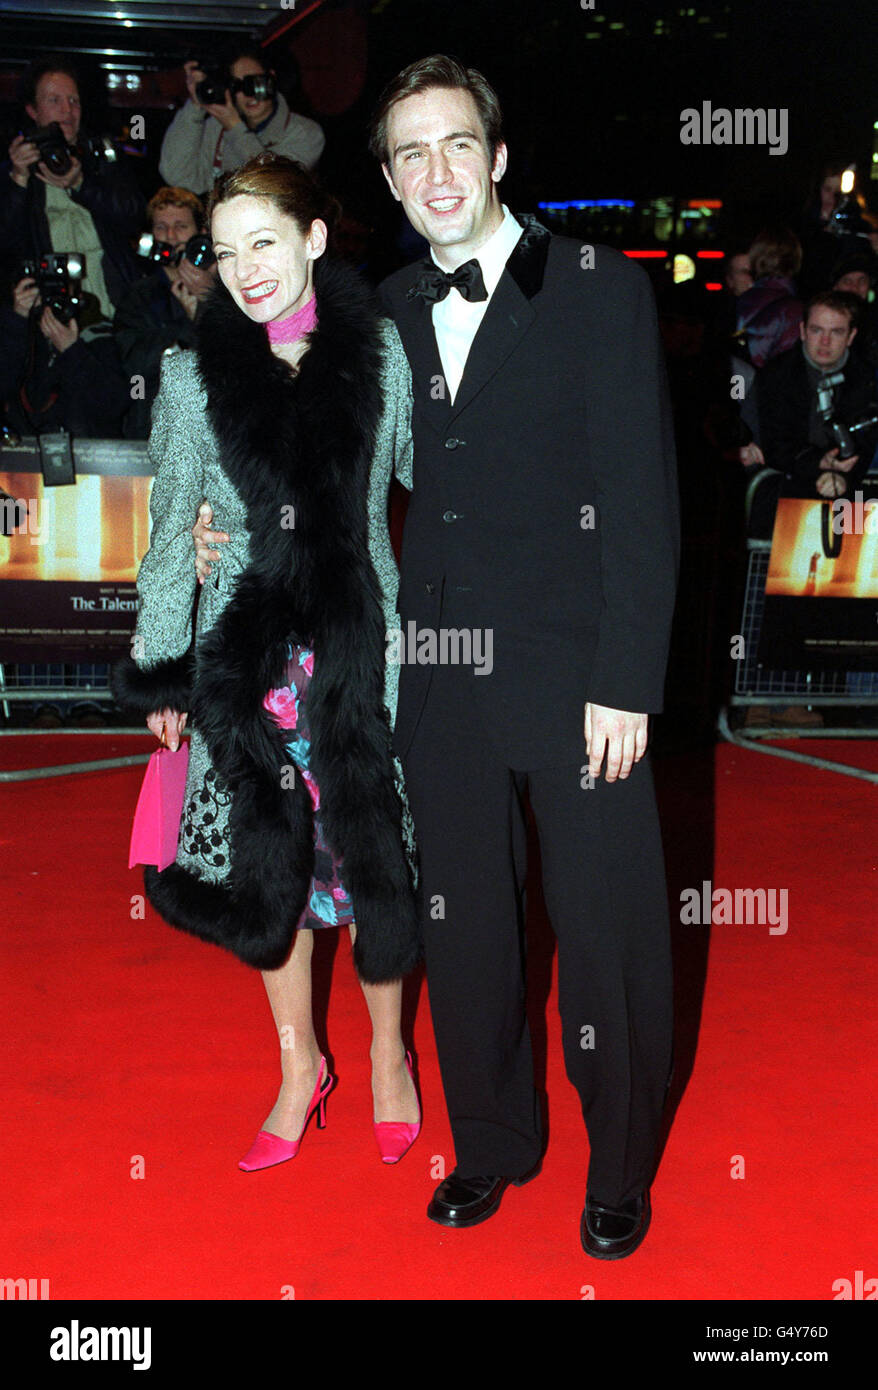 'This Life' actor Jack Davenport arrives at the premiere the film 'The Talented Mr Ripley', in Leicester Square, London. Stock Photo